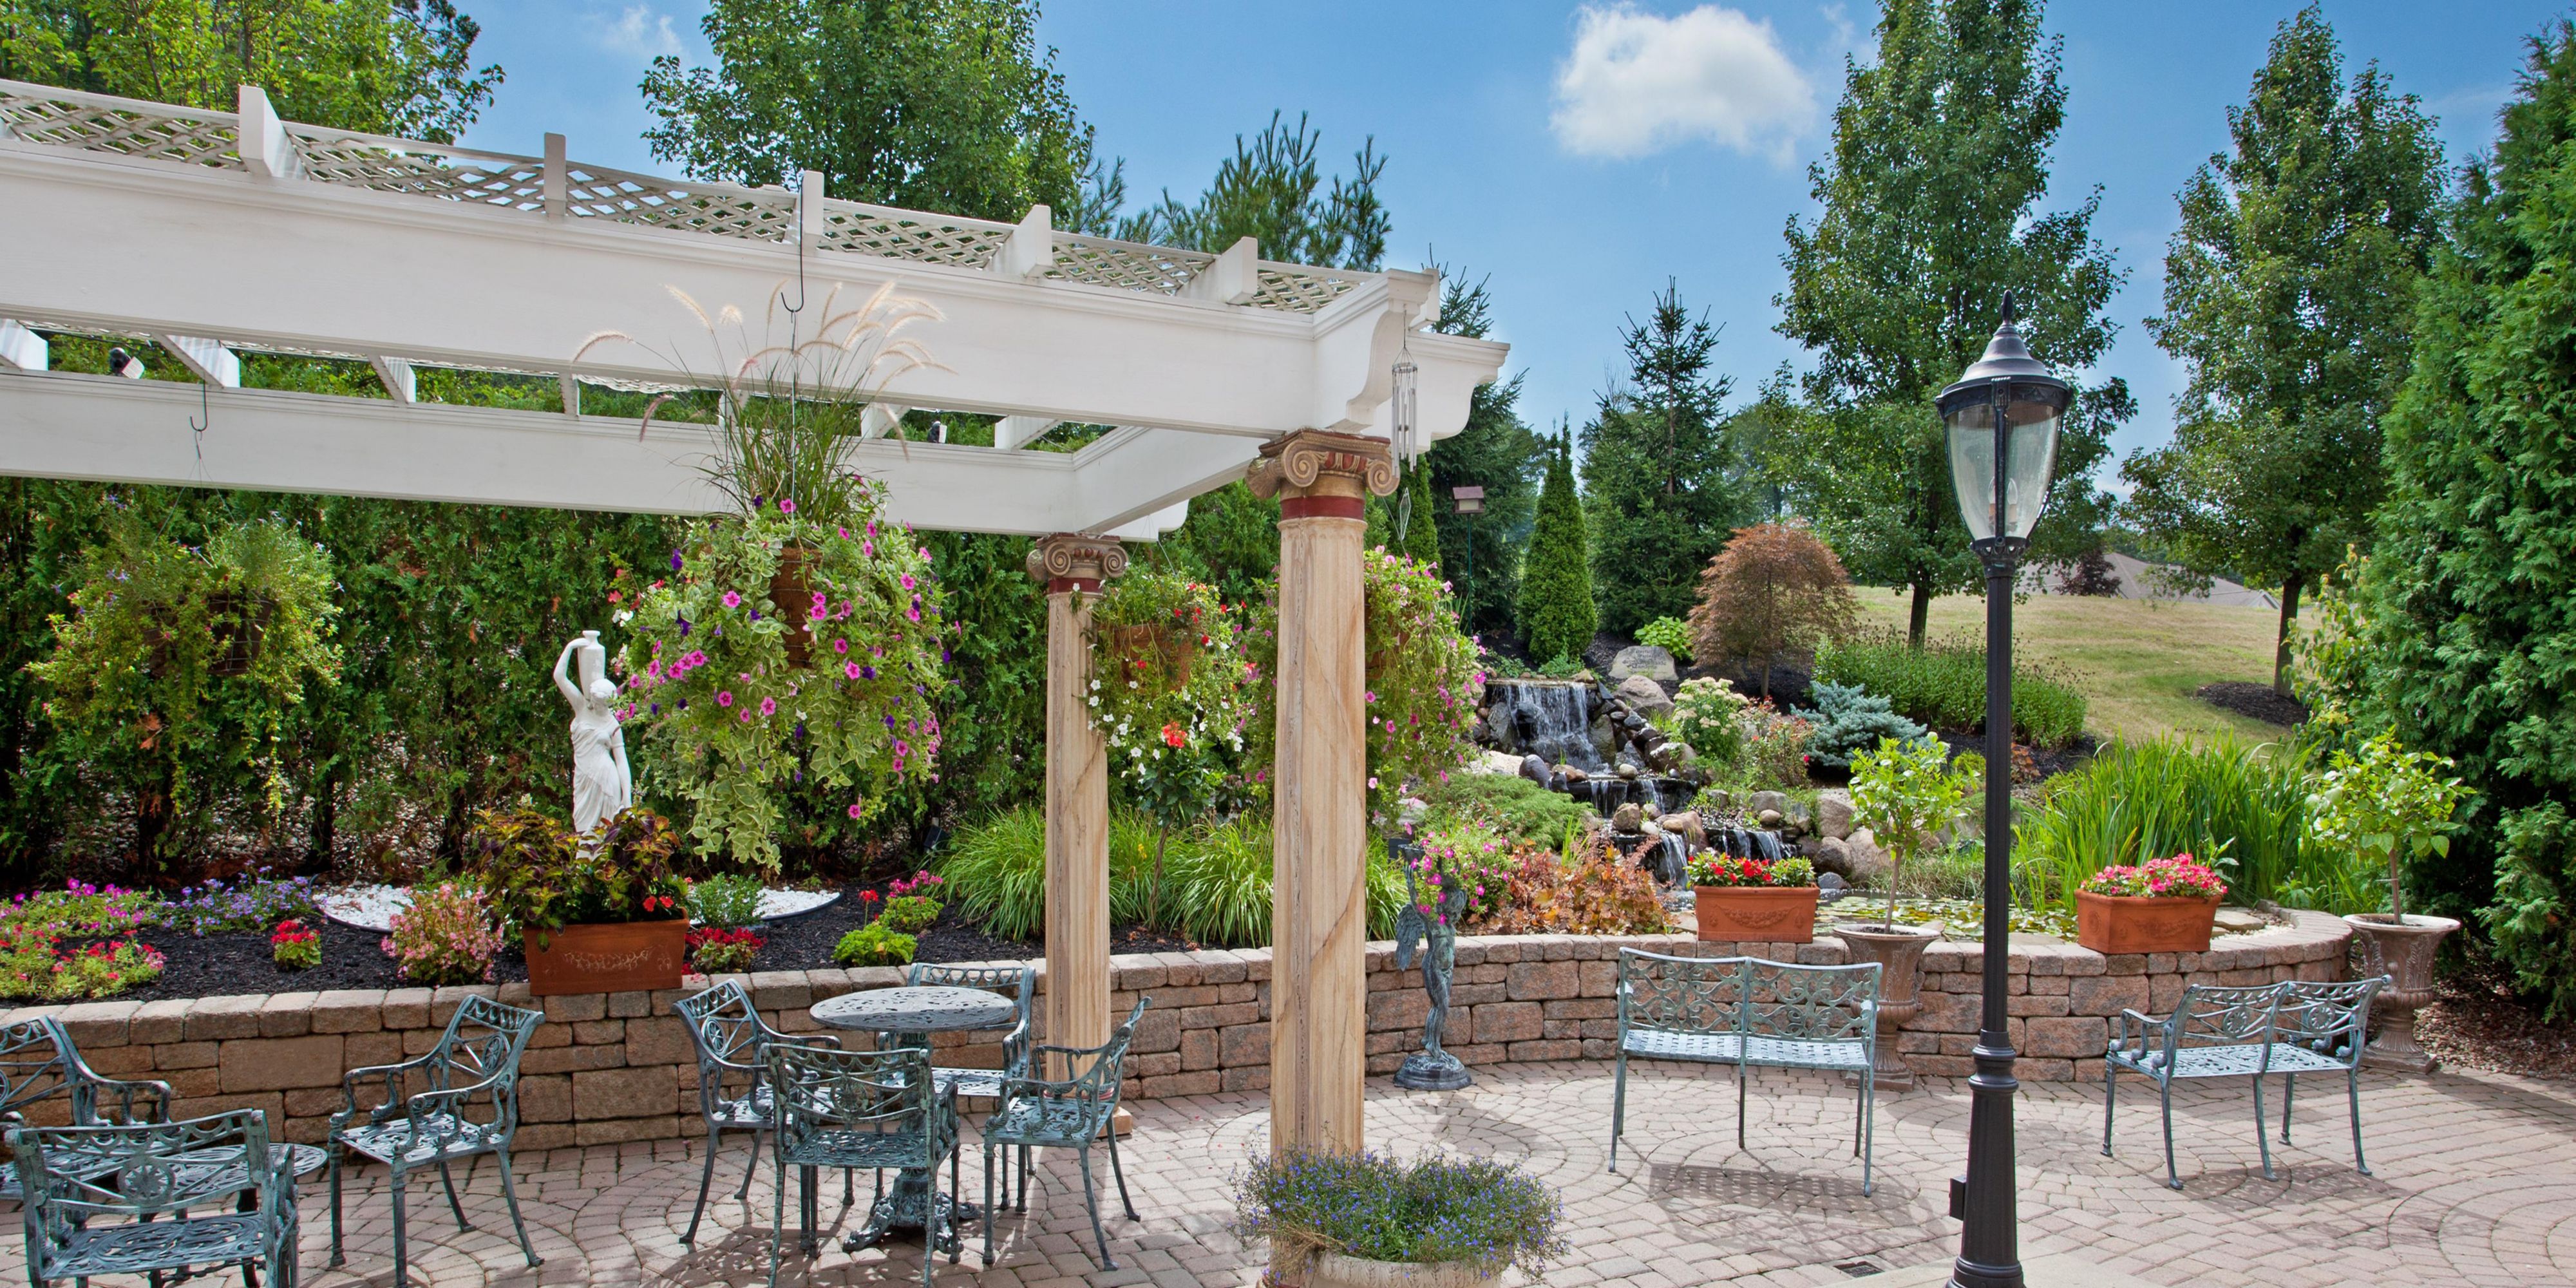 Enjoy some downtime on our picturesque patio featuring a waterfall and koi pond. 